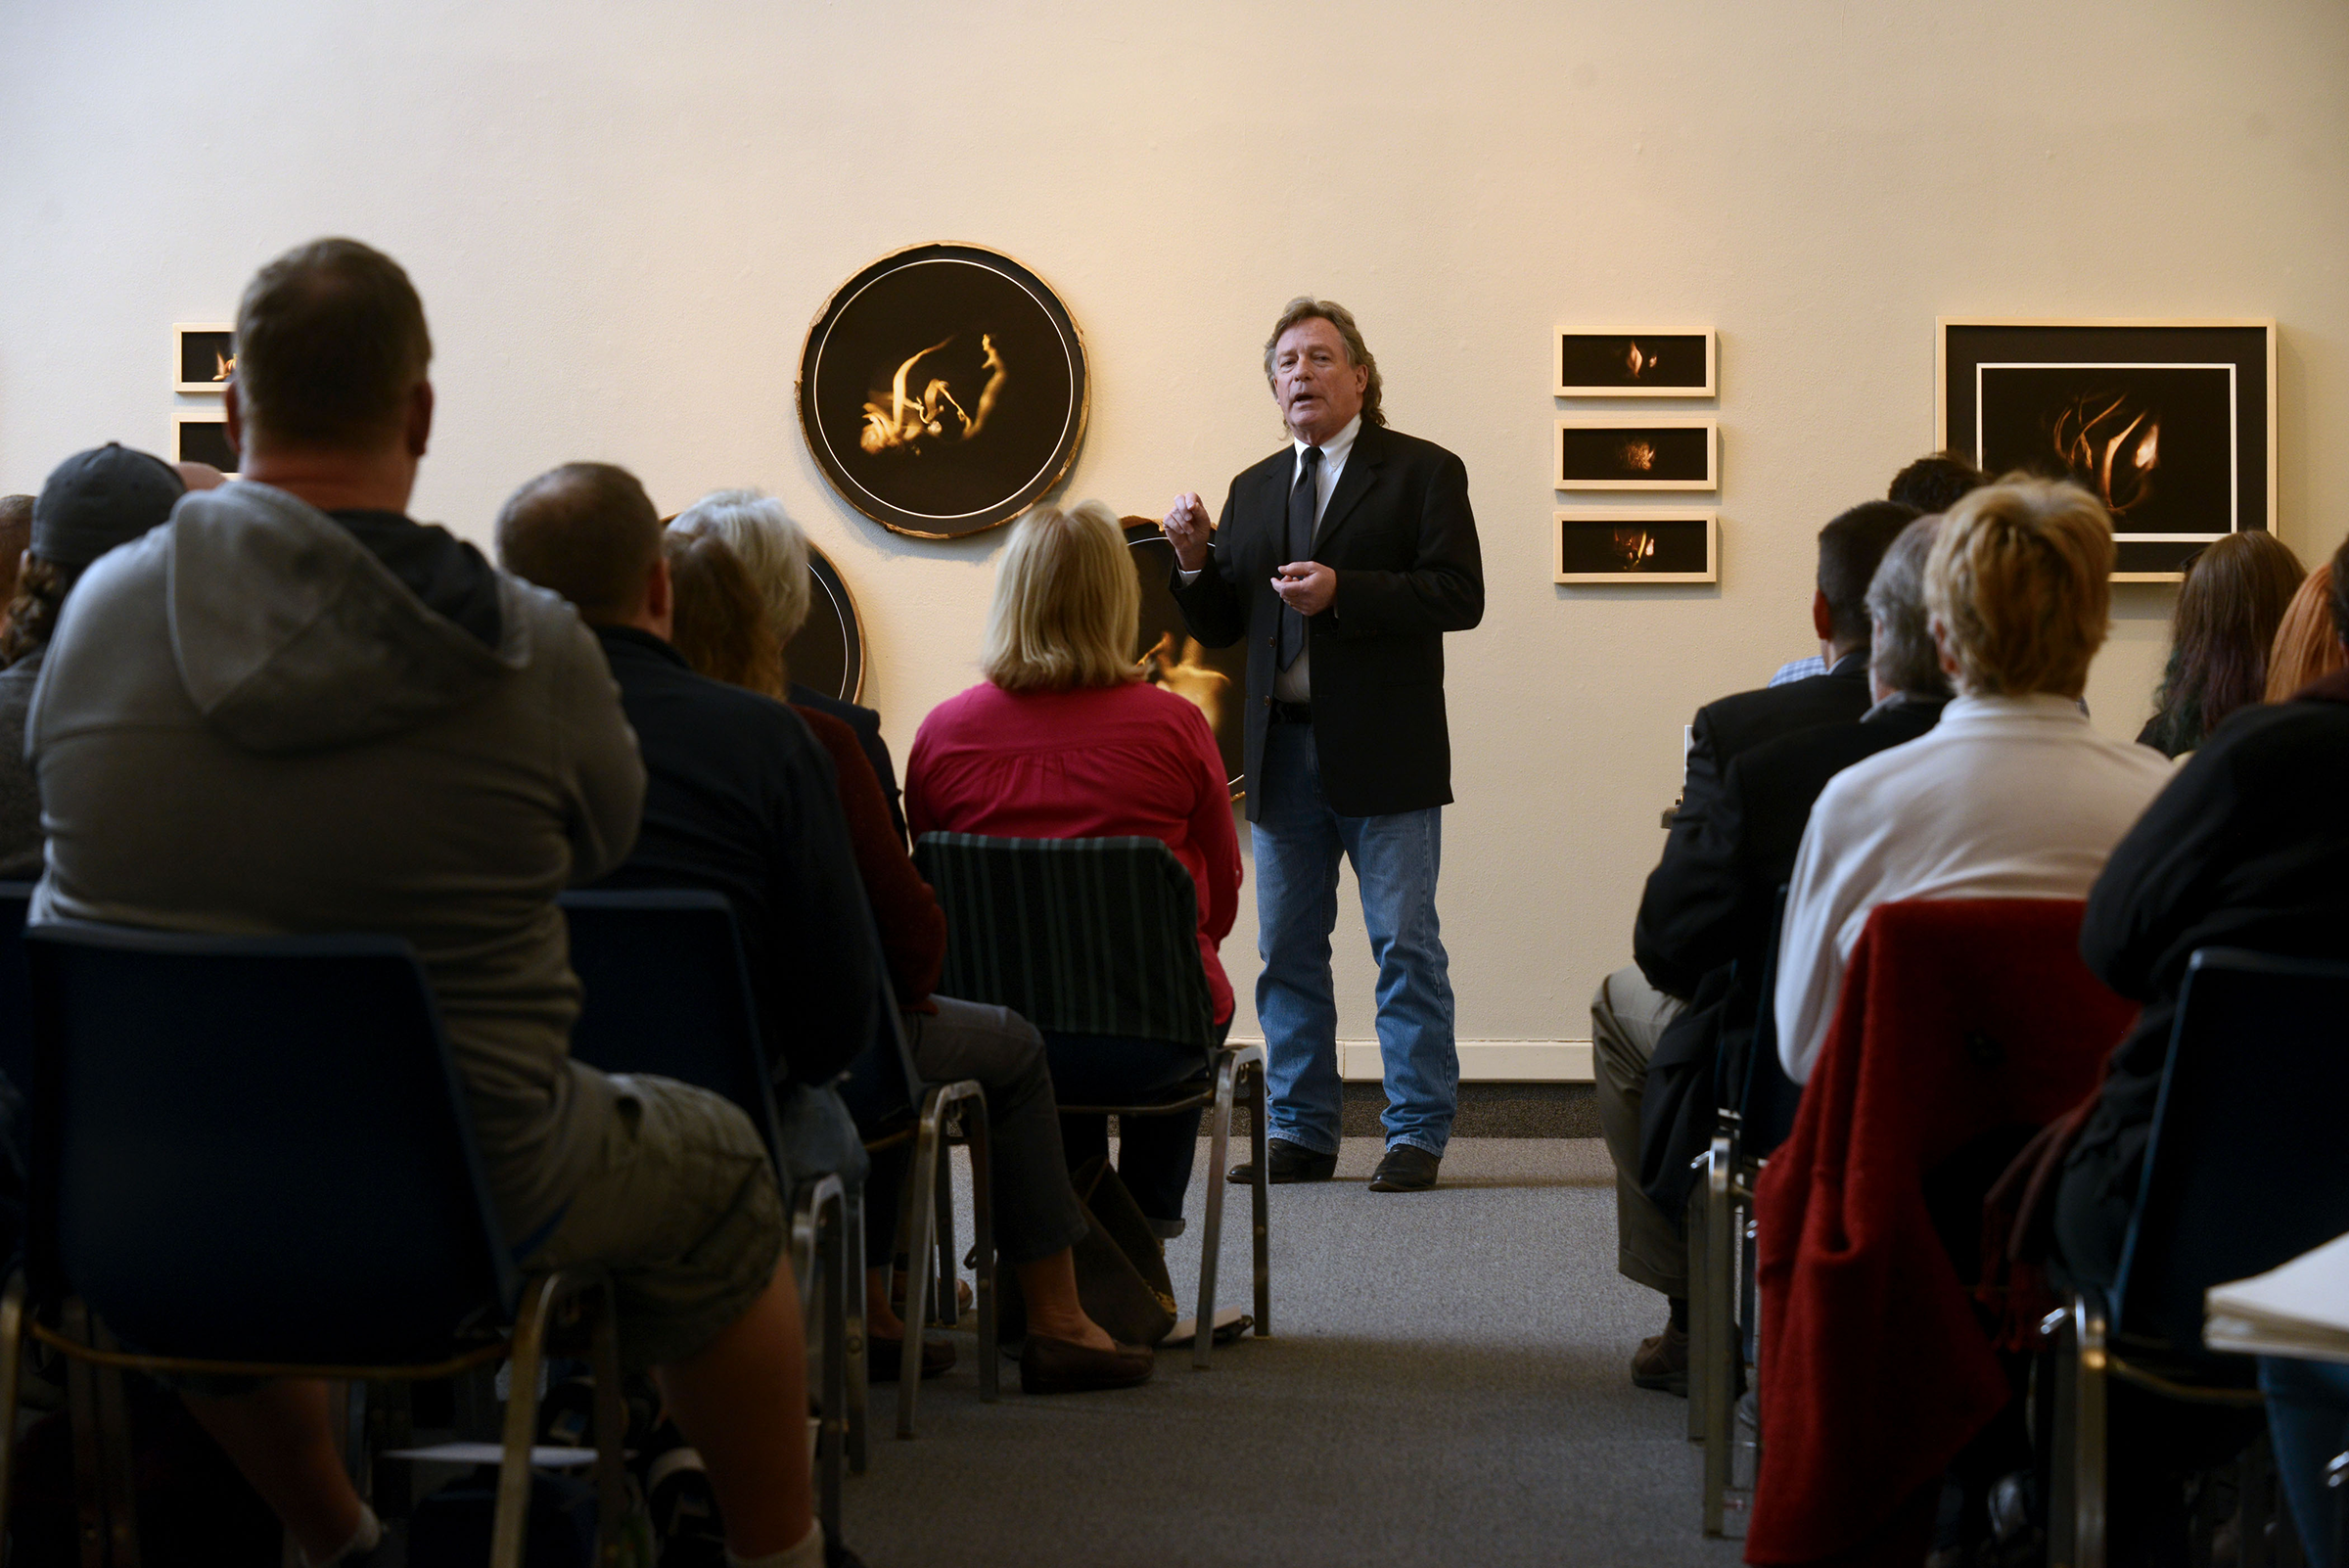 Dr. Jim Jipson speaks to crowd during the Rite of Passage lecture series at The Art Gallery at UWF.